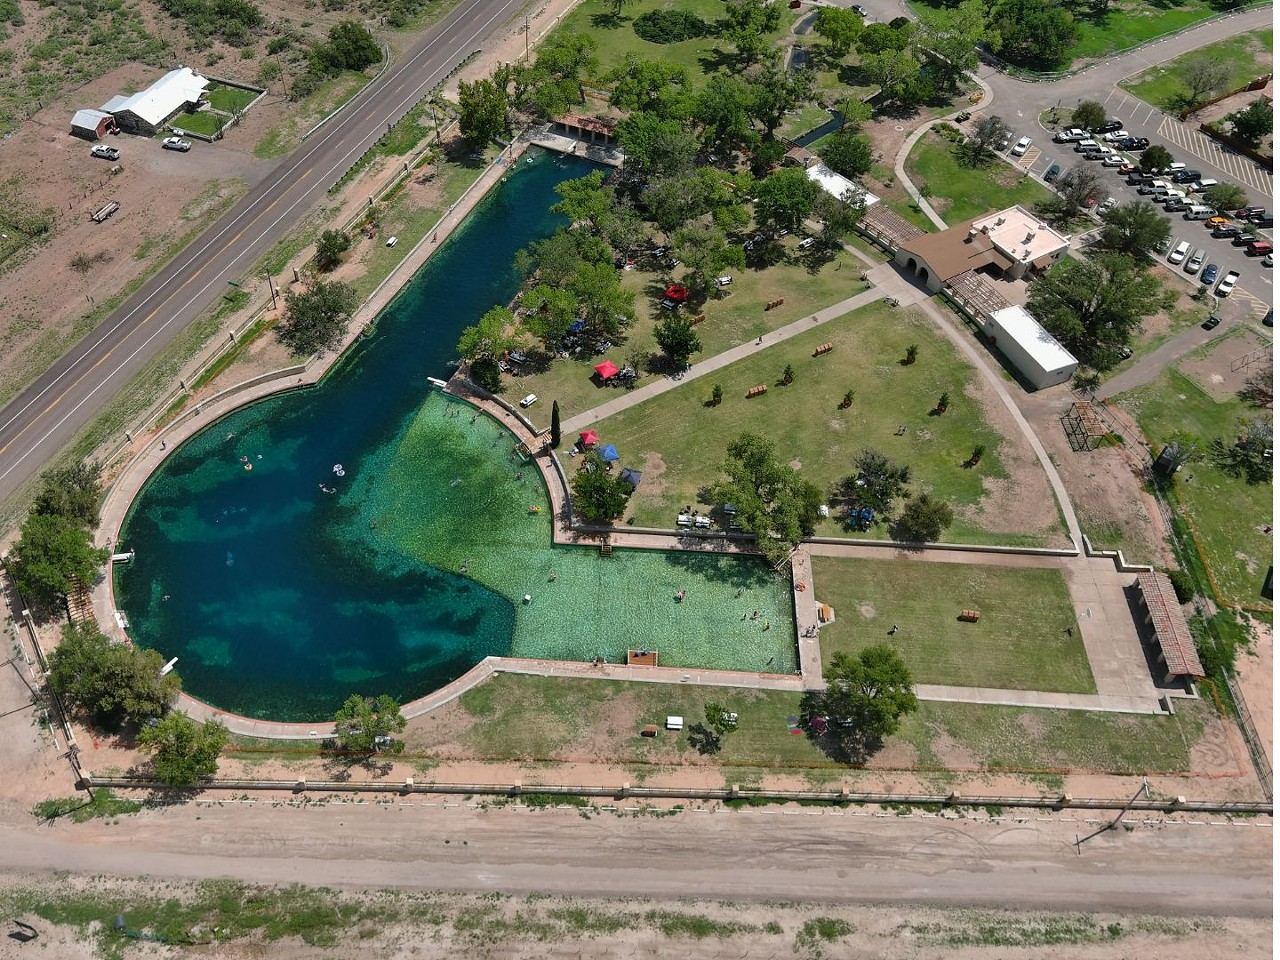 Balmorhea State Park
9207 TX-17, Toyahvale, (432) 375-2370, tpwd.texas.gov
Located in the West Texas town of Toyahvale, Balmorhea State Park's legendary swimming pool is worth the lengthy drive to get there. Fed by San Solomon Springs, the park's pool stays 72 to 76 degrees year-round. Visitors can swim, snorkel and even scuba dive in the 1.3-acre pool, which reaches depths of up to 25 feet.